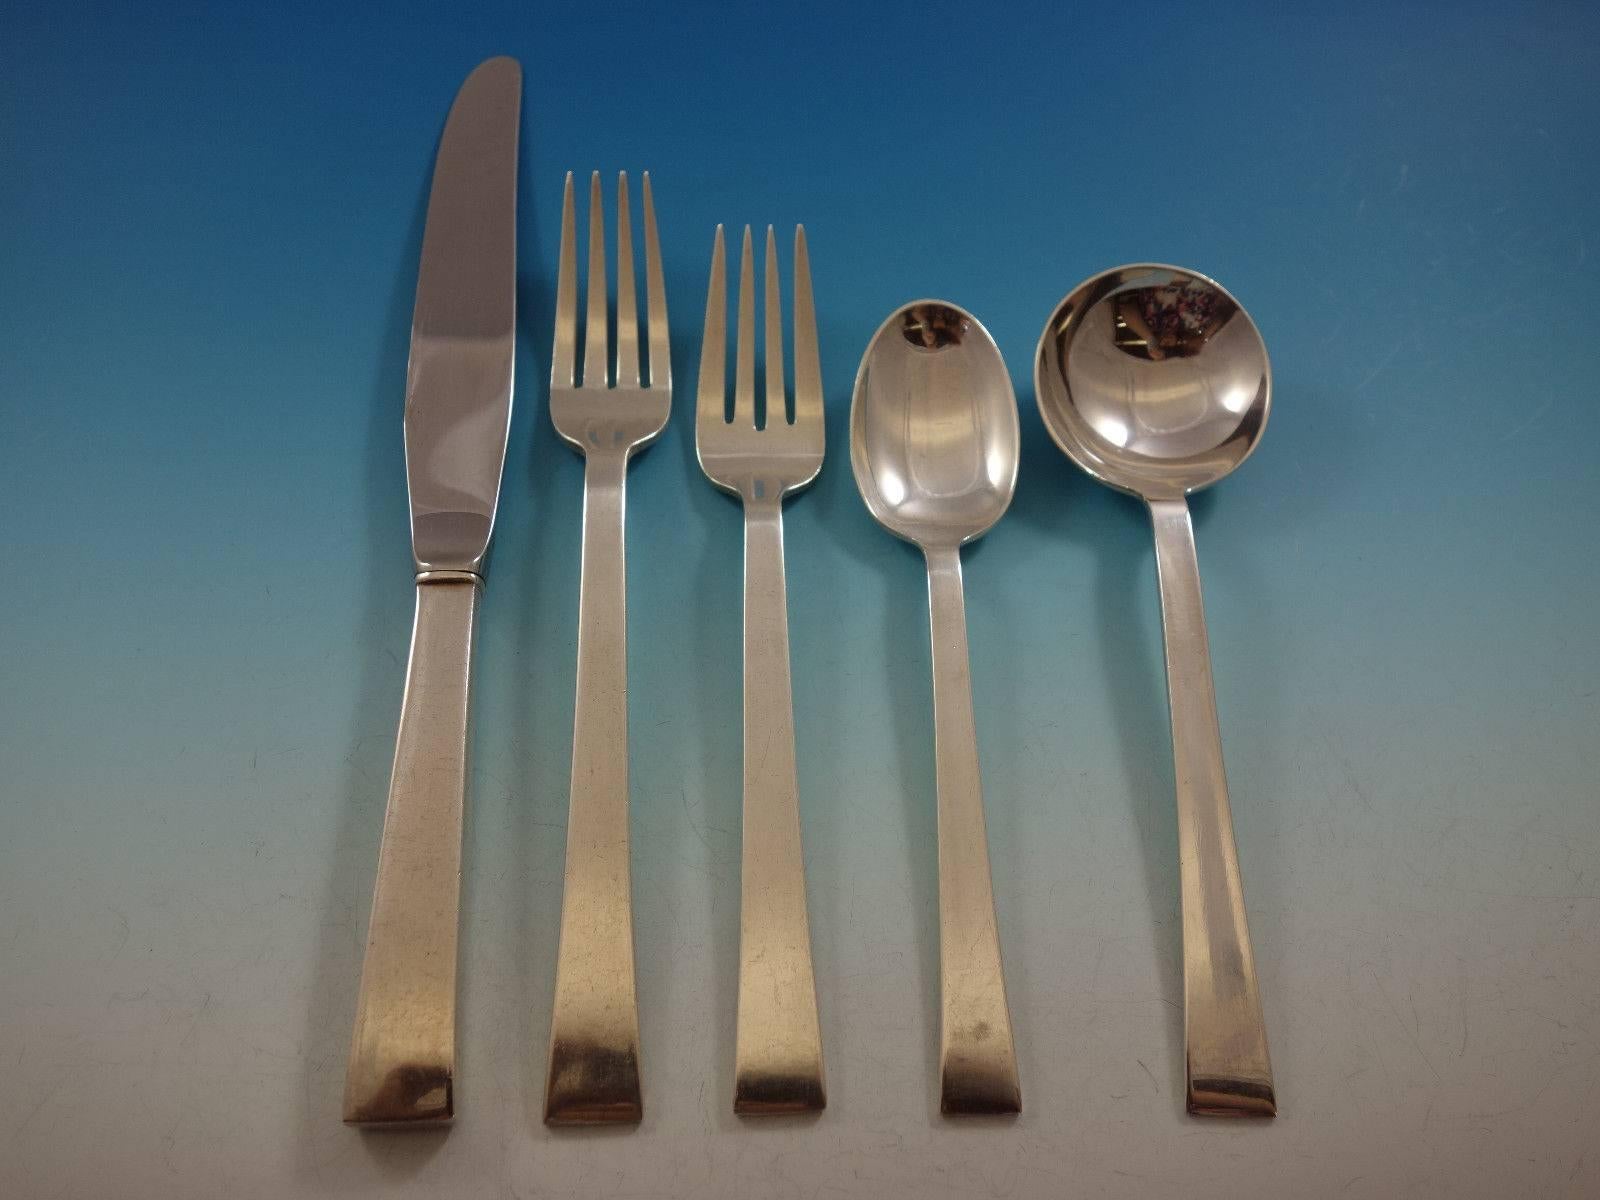 Continental by international sterling silver flatware set - 86 piece set, in excellent condition. This pattern is wonderfully simple, modern, and heavy. This set includes: 12 knives, 8 3/4